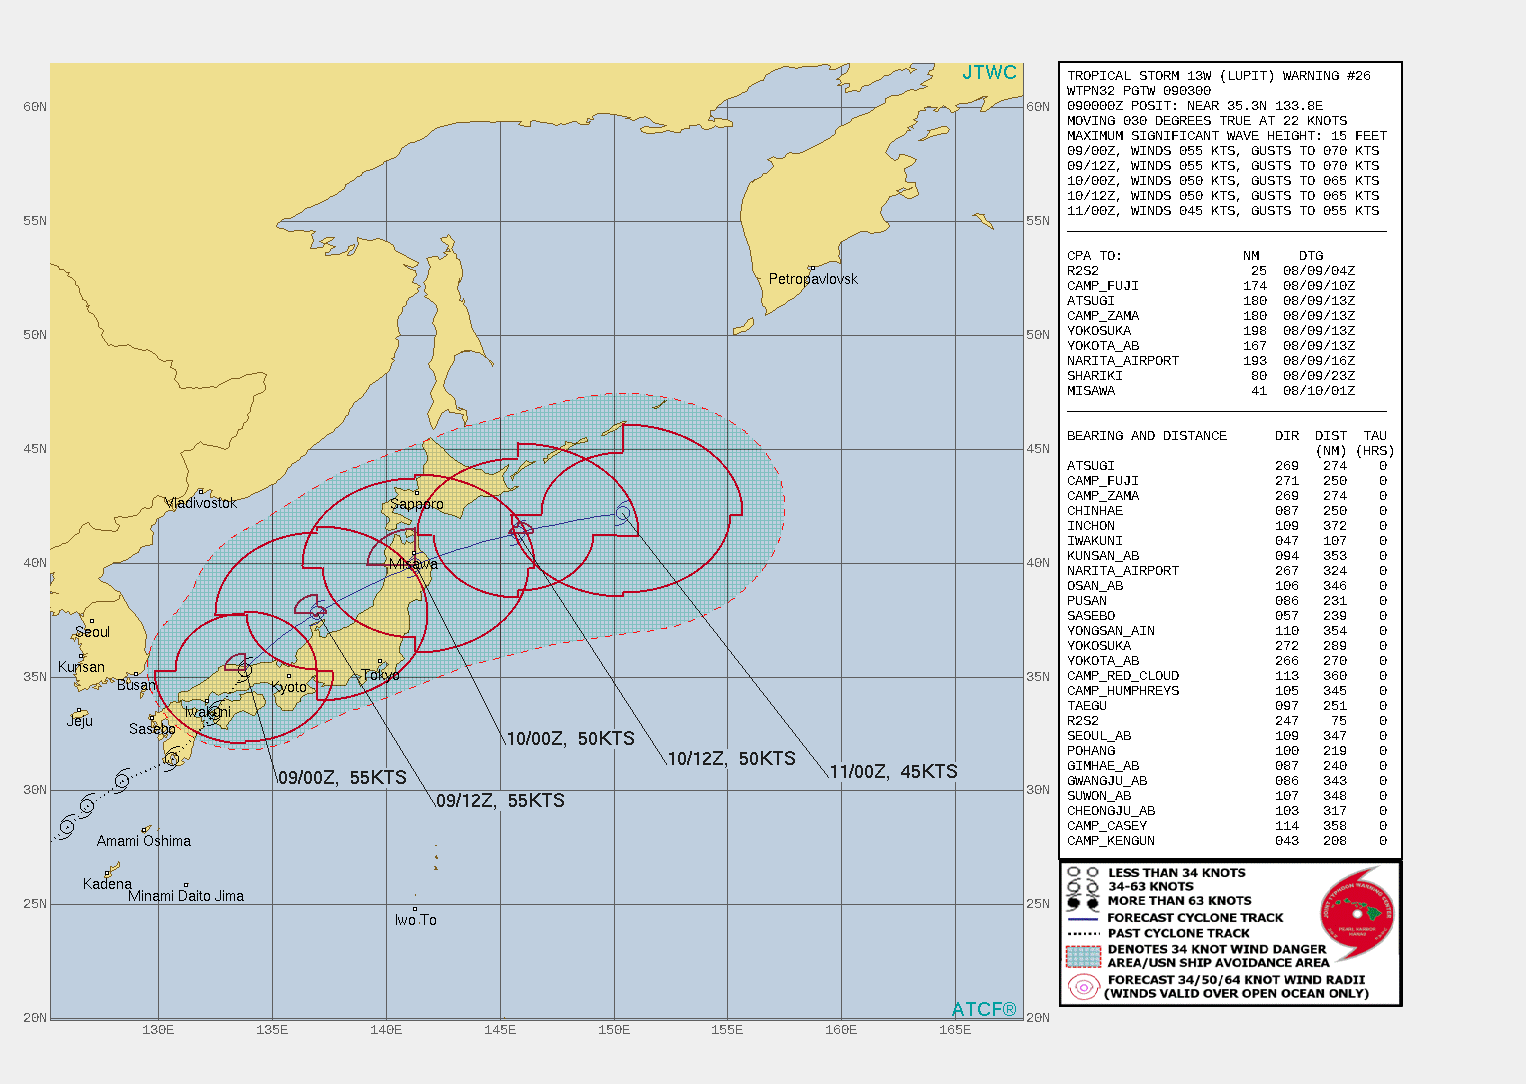 TS 13W(LUPIT). WARNING 26 ISSUED AT 09/03UTC.THERE ARE NO SIGNIFICANT CHANGES TO THE FORECAST FROM THE PREVIOUS WARNING.  FORECAST DISCUSSION: TS LUPIT WILL CONTINUE TO TRACK NORTHEASTWARD UNDER THE STEERING INFLUENCE OF THE SUBTROPICAL RIDGE(STR) AND EXIT INTO THE SEA OF JAPAN SHORTLY. AFTER 24H, IT WILL TRACK MORE EAST-NORTHEASTWARD ALONG THE NORTHWEST PERIPHERY OF THE STR, THEN CROSS NORTHERN HONSHU JUST SOUTH OF MISAWA AND EXIT BACK INTO THE PACIFIC OCEAN  AFTER 24H. THE MARGINALLY FAVORABLE ENVIRONMENT WILL ALLOW INTENSITY TO SUSTAIN AT 55KNOTS THROUGH 12H IN THE RELATIVELY WARM  SOJ. AFTERWARD, INCREASING VERTICAL WIND SHEAR OF 20-25 KNOTS, LAND INTERACTION, AND COOLING SSTS (24-25 DEGREES CELSIUS) IN THE PACIFIC OCEAN WILL ERODE THE SYSTEM DOWN TO 45KNOTS AT 48H. BY 24H, THE SYSTEM WILL BEGIN EXTRATROPICAL TRANSITION AND FULLY TRANSFORM INTO A 45-KNOT COLD CORE LOW BY 48H.